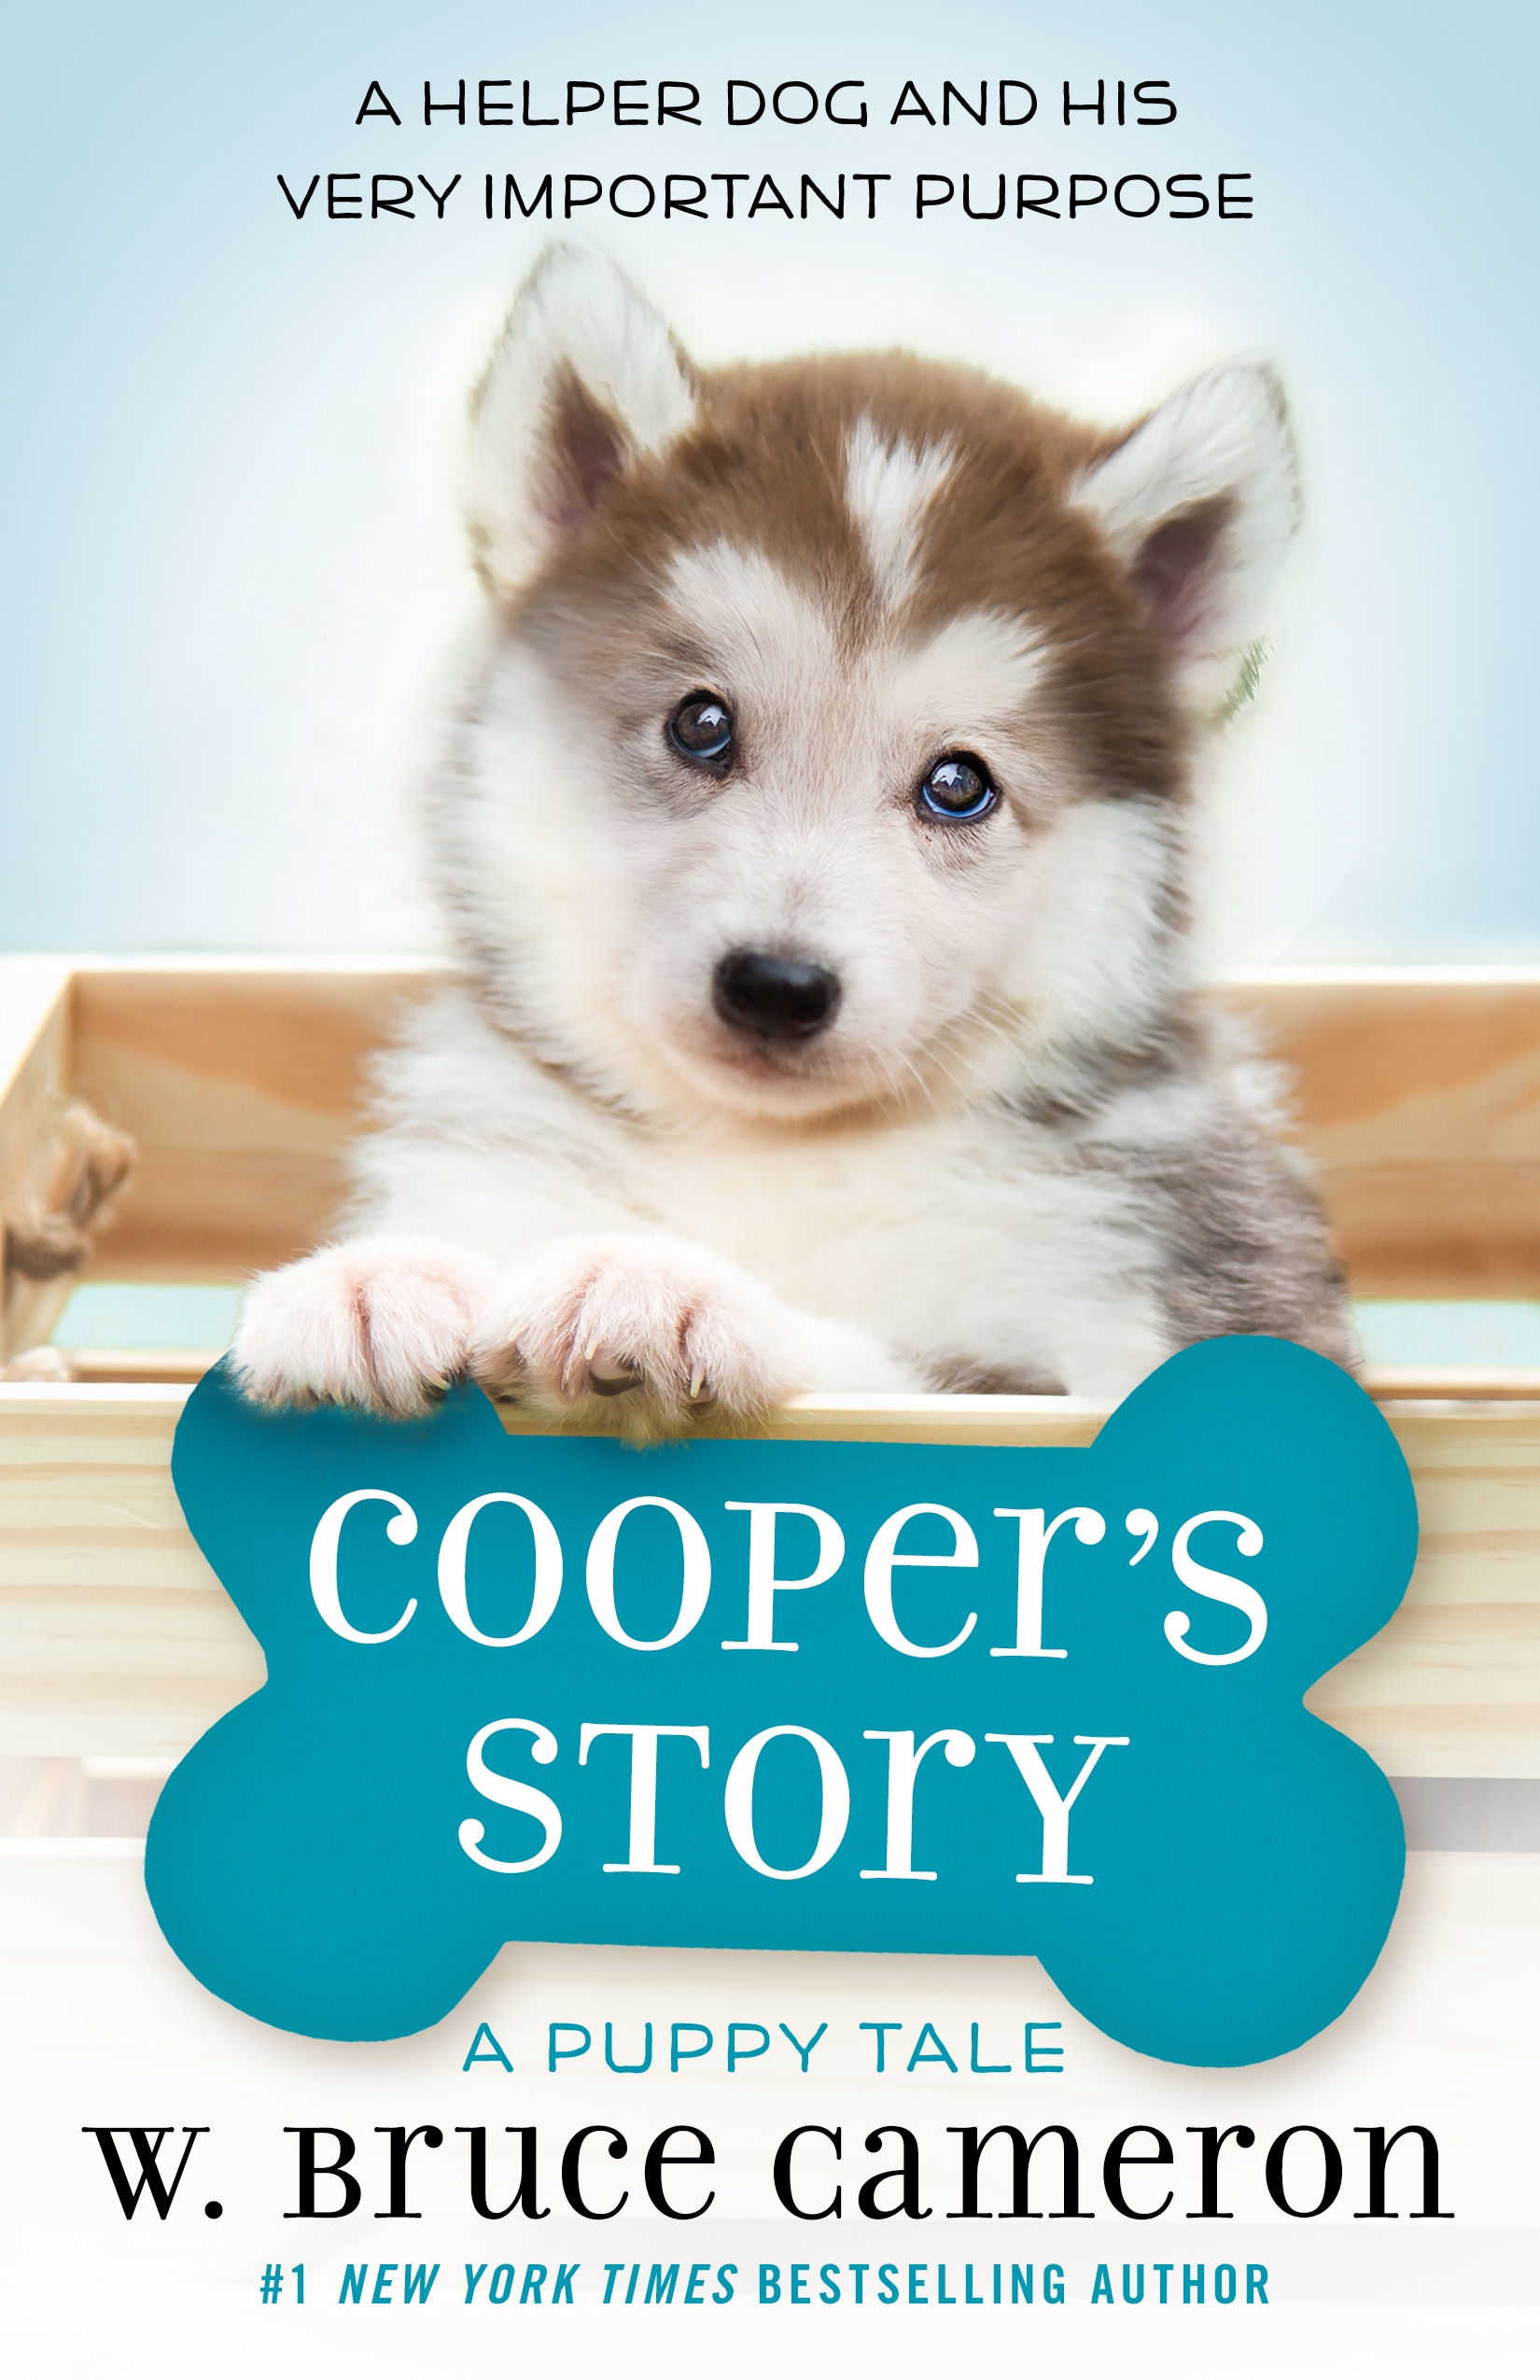 Cooper's Story : A Puppy Tale by W. Bruce Cameron